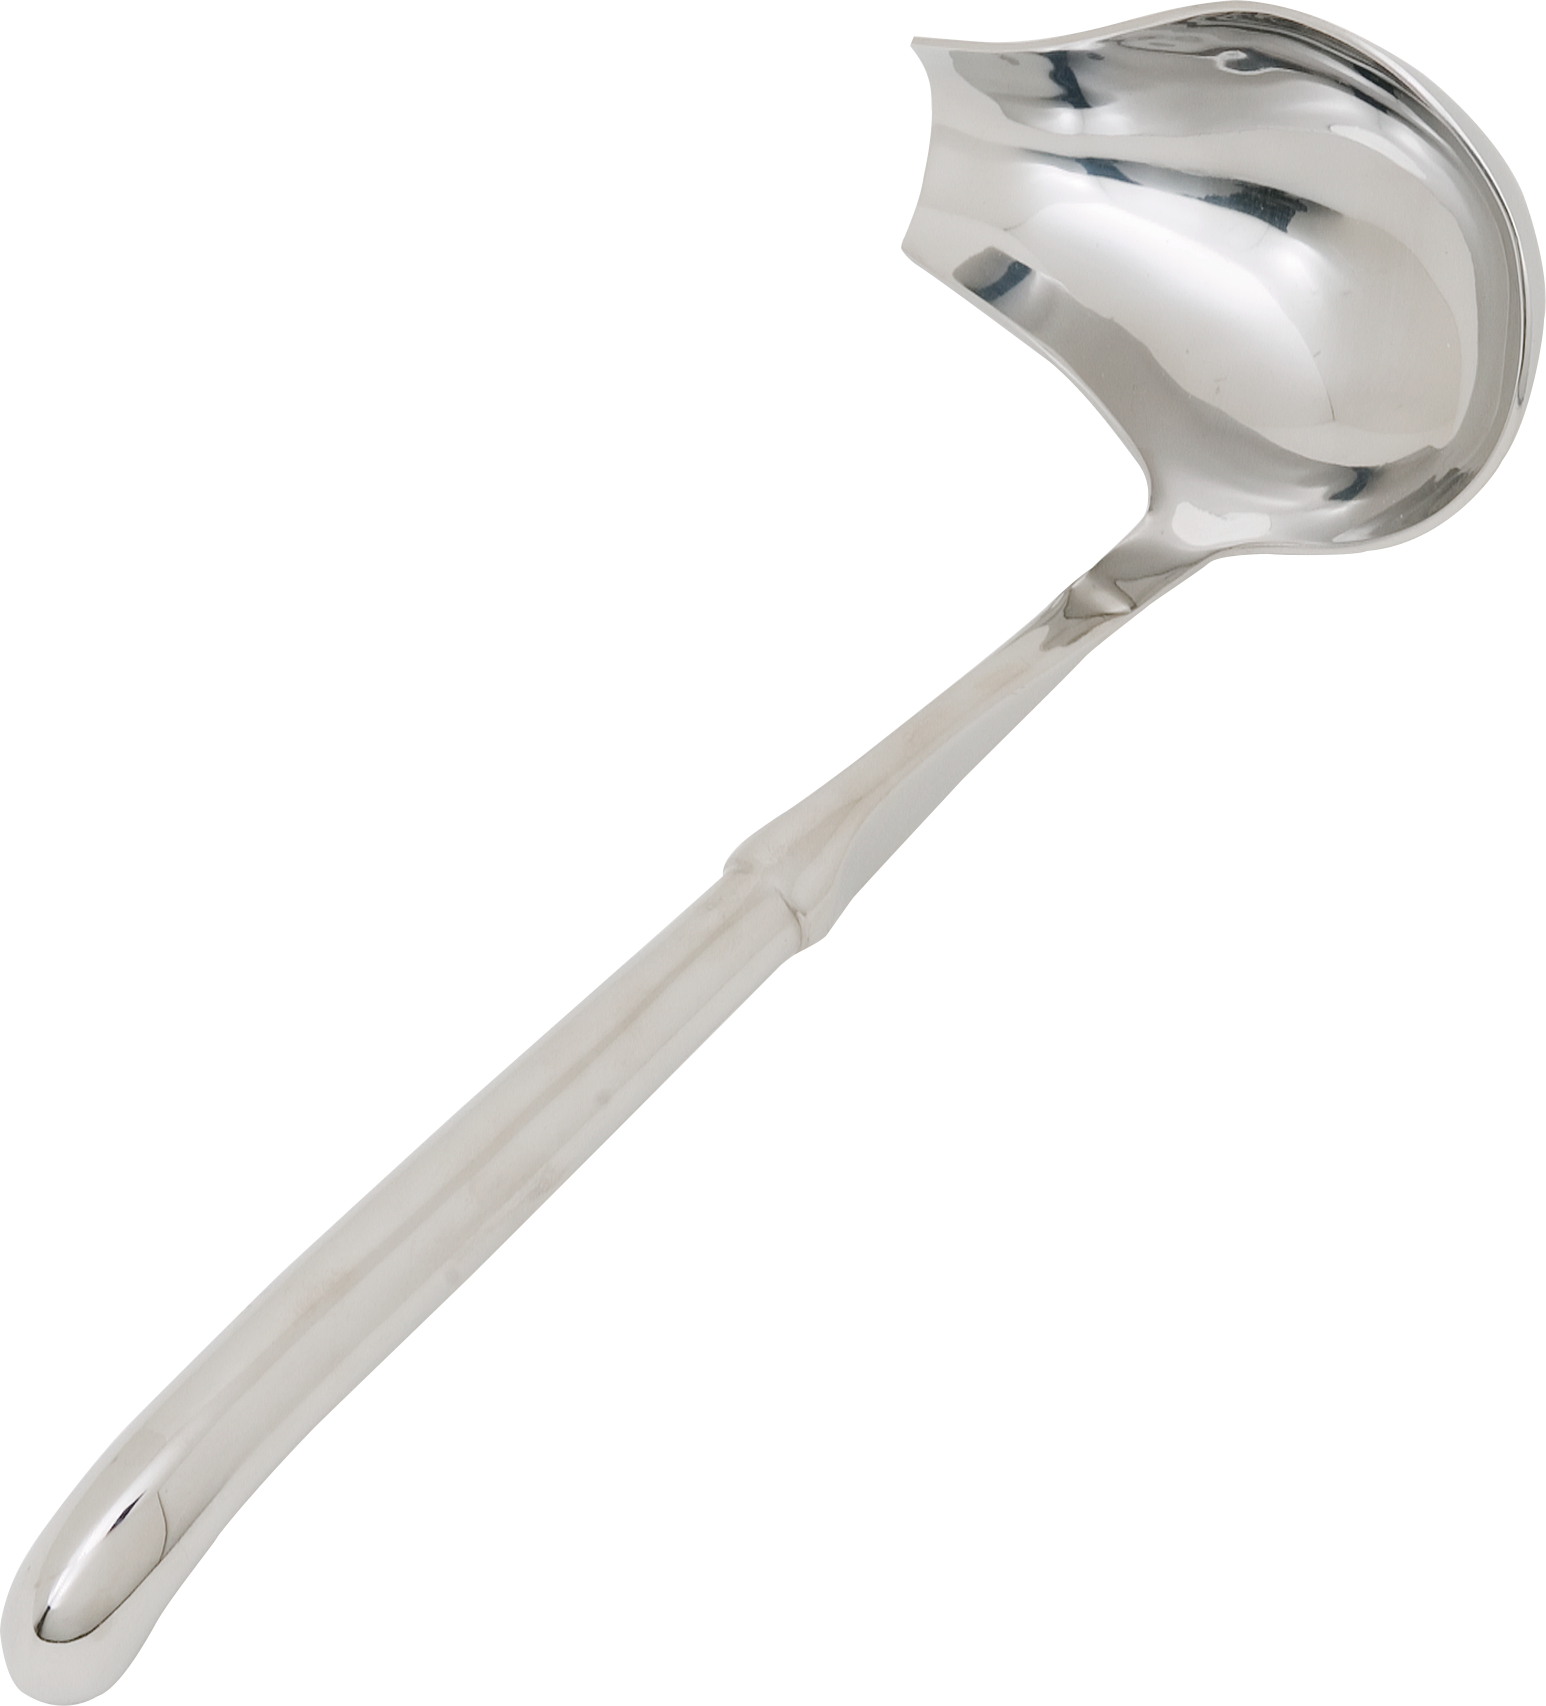 Venico Ladle With Spout 11 - Stainless Steel